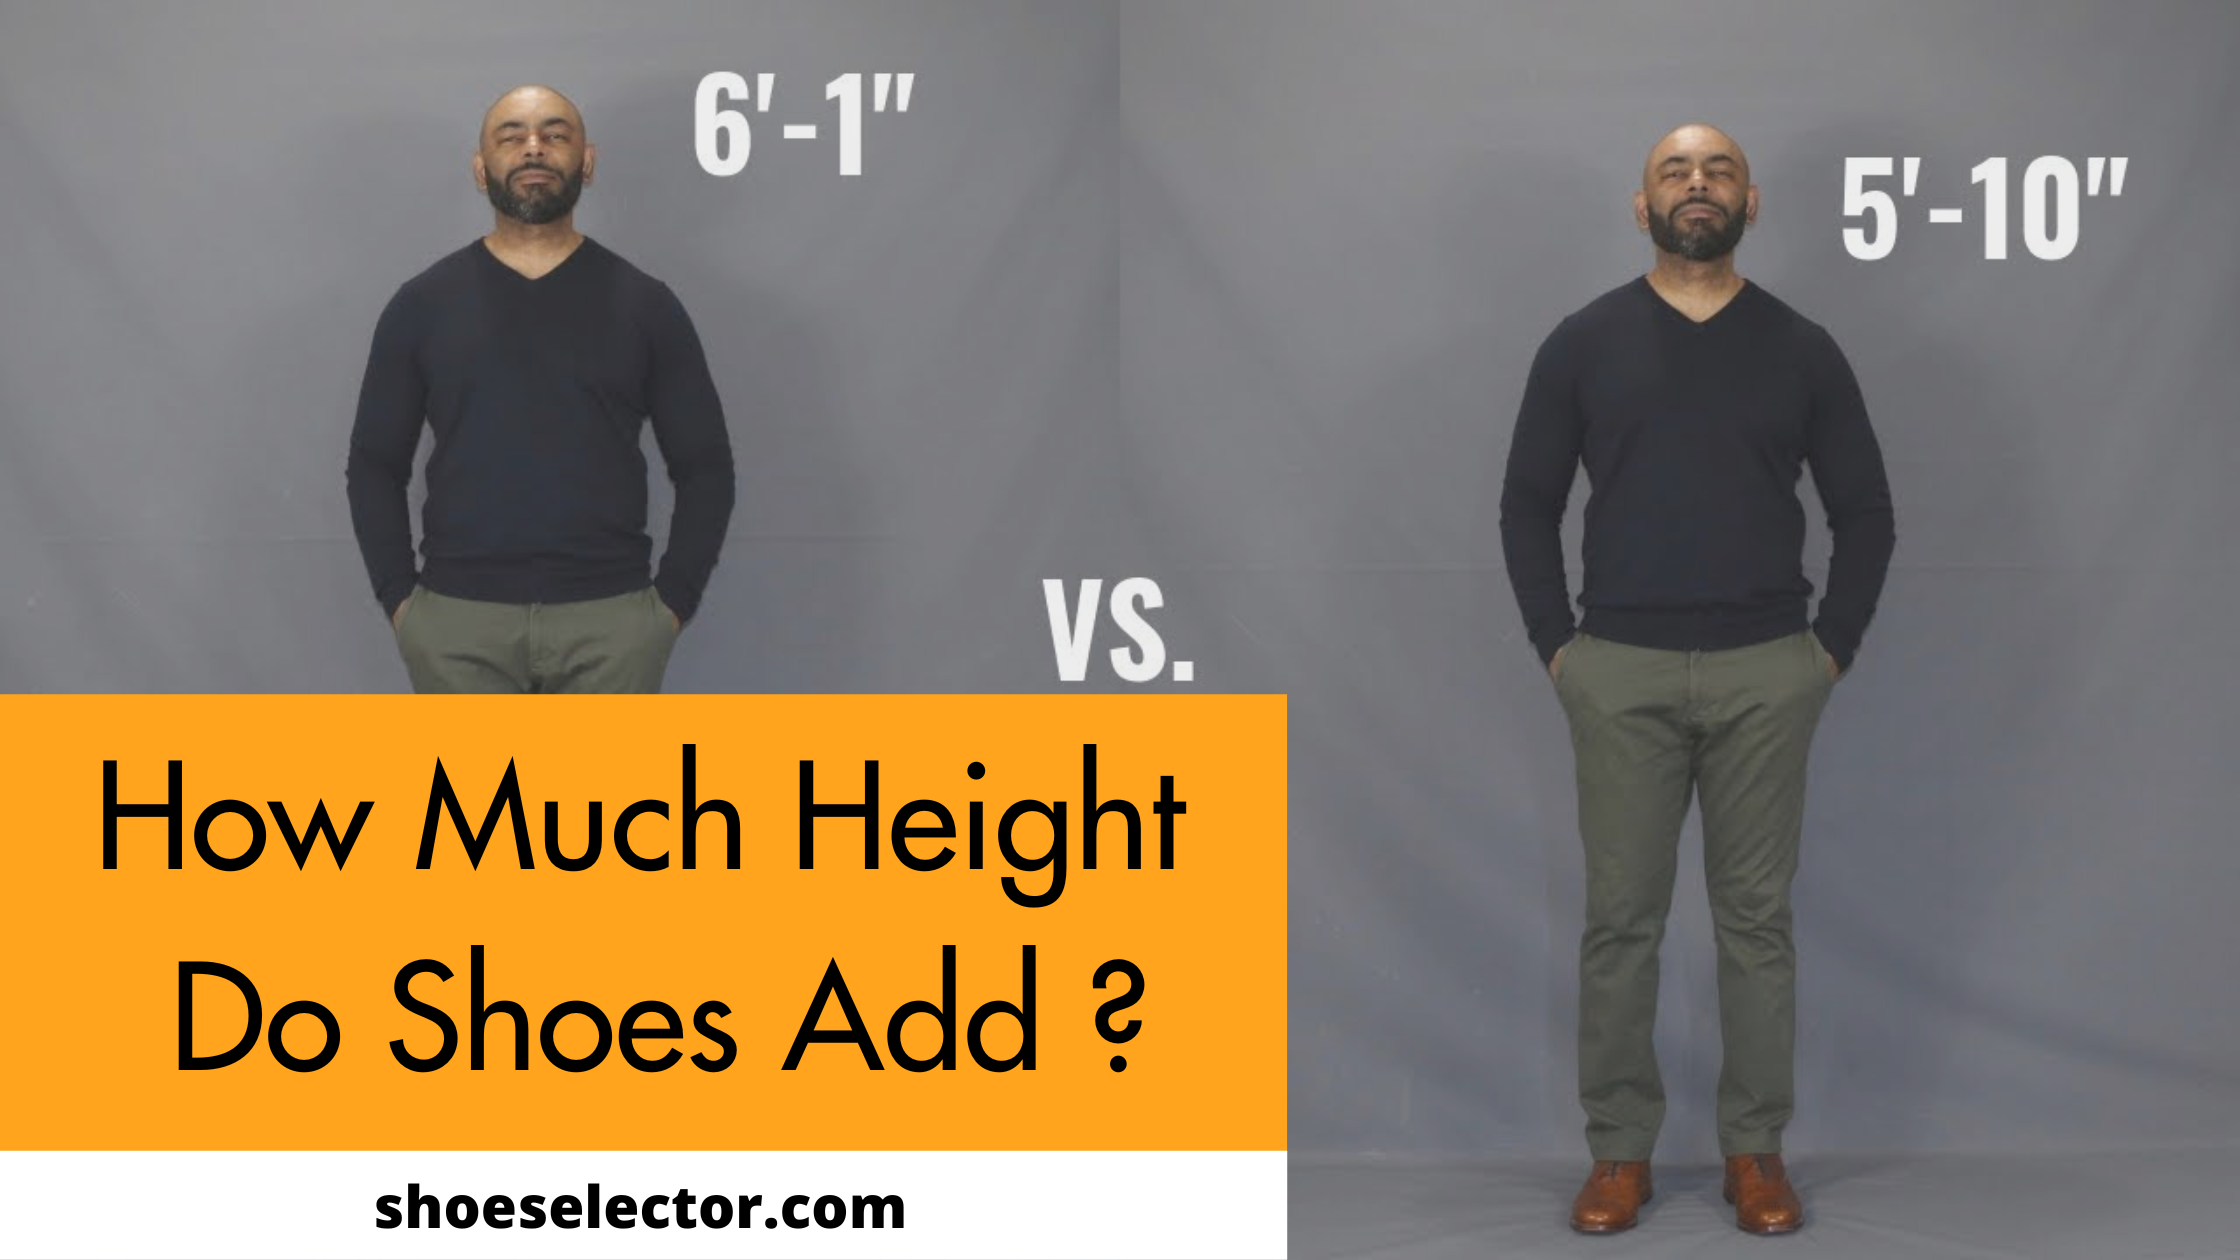 How Much Height do Shoes Add? Learn Some Important Tips